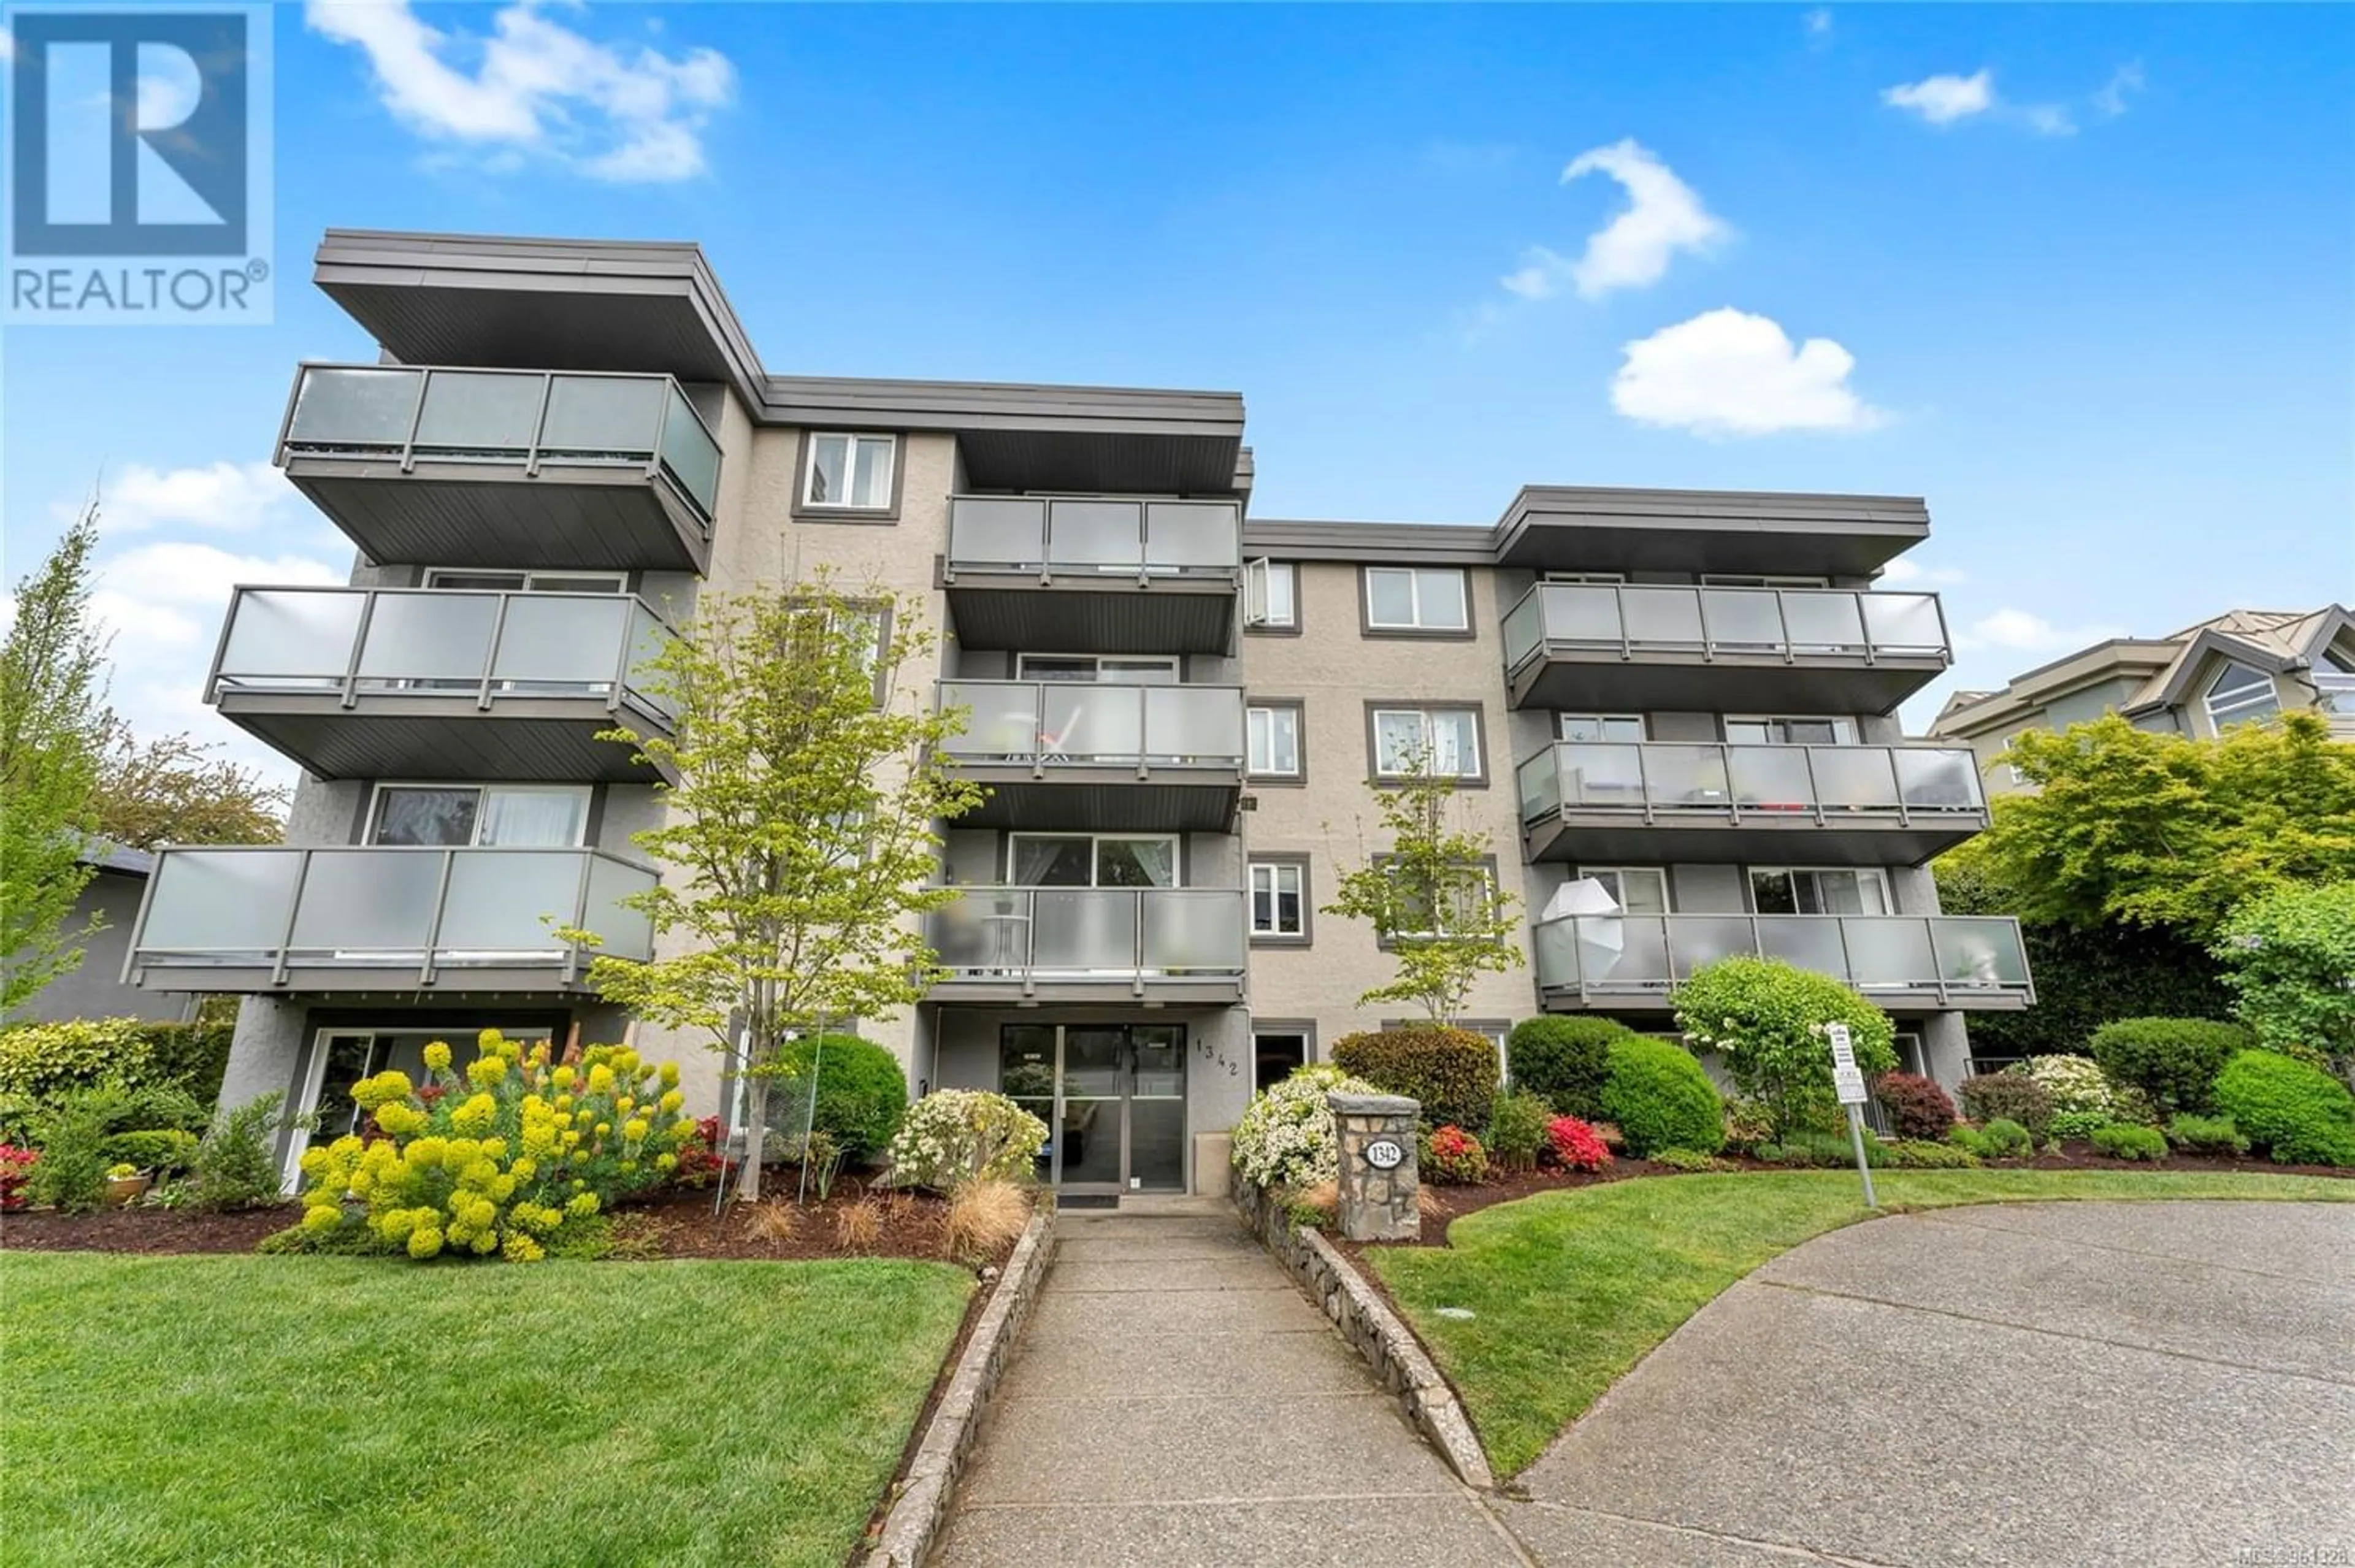 A pic from exterior of the house or condo for 404 1342 Hillside Ave, Victoria British Columbia V8T2B4